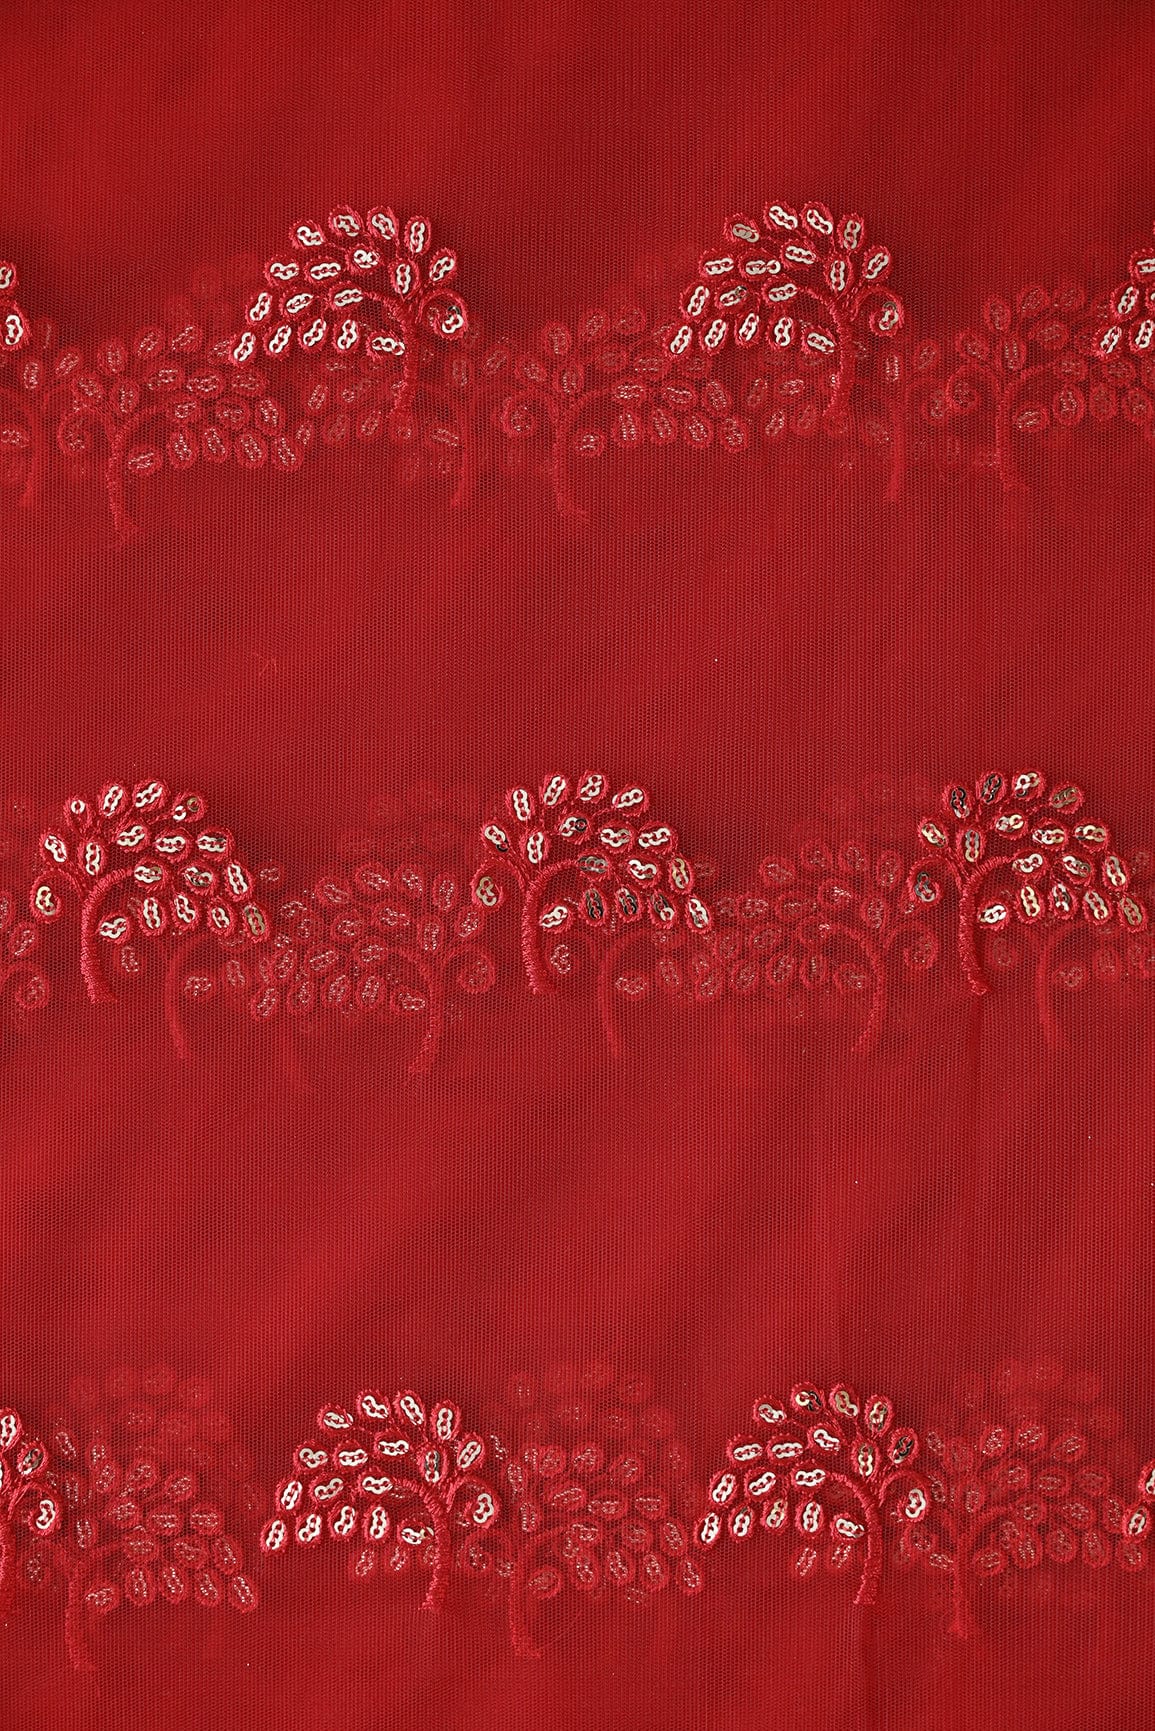 doeraa Embroidery Fabrics Red Thread With Gold Sequins Leafy Embroidery Work On Red Soft Net Fabric